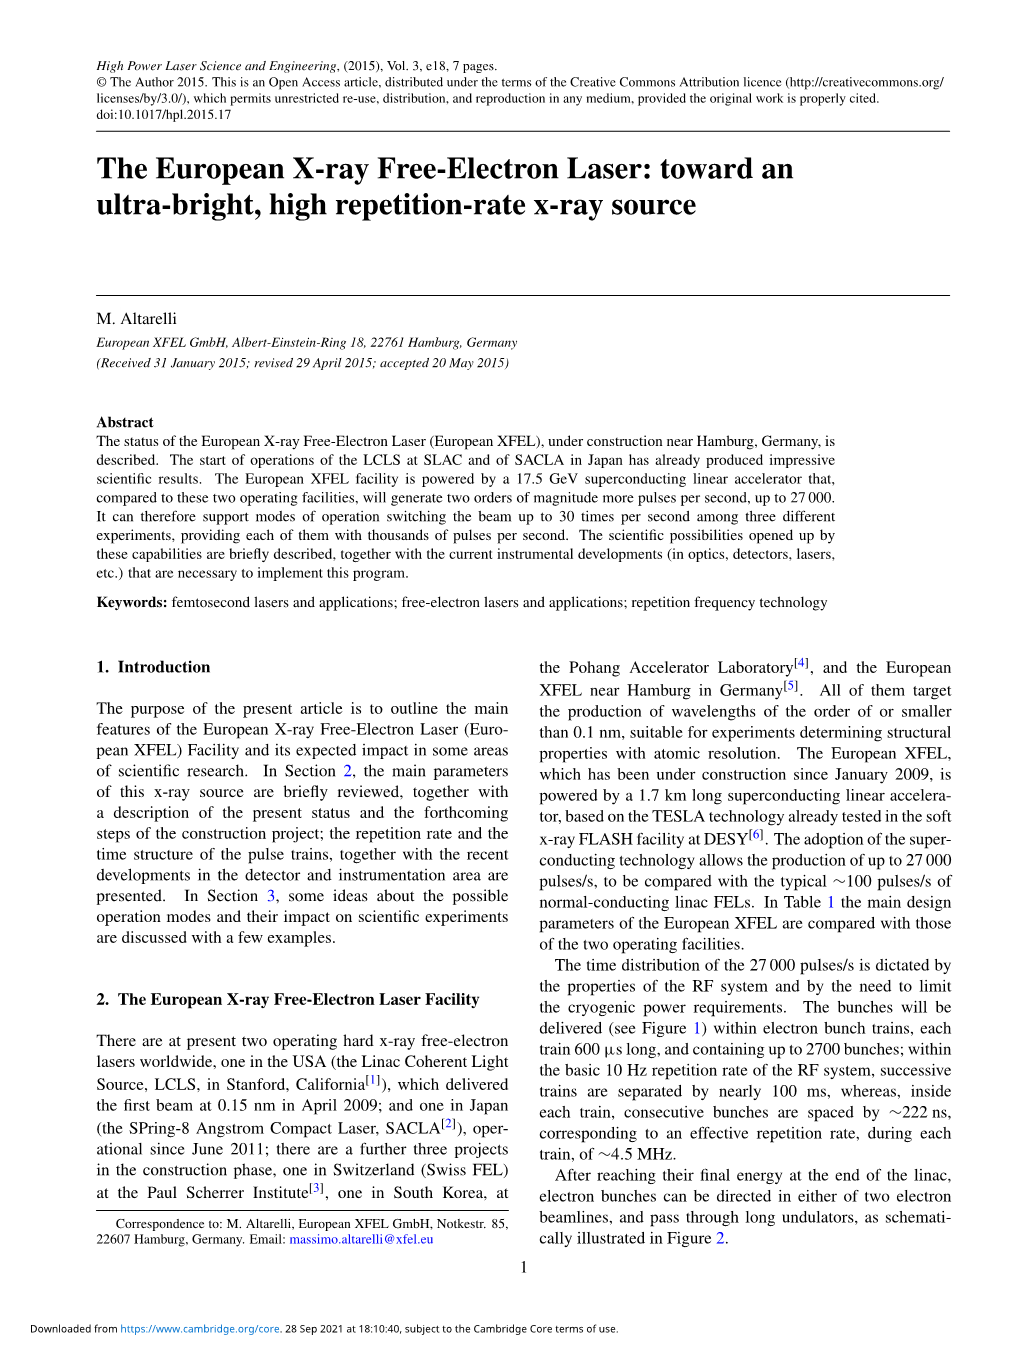 The European X-Ray Free-Electron Laser: Toward an Ultra-Bright, High Repetition-Rate X-Ray Source